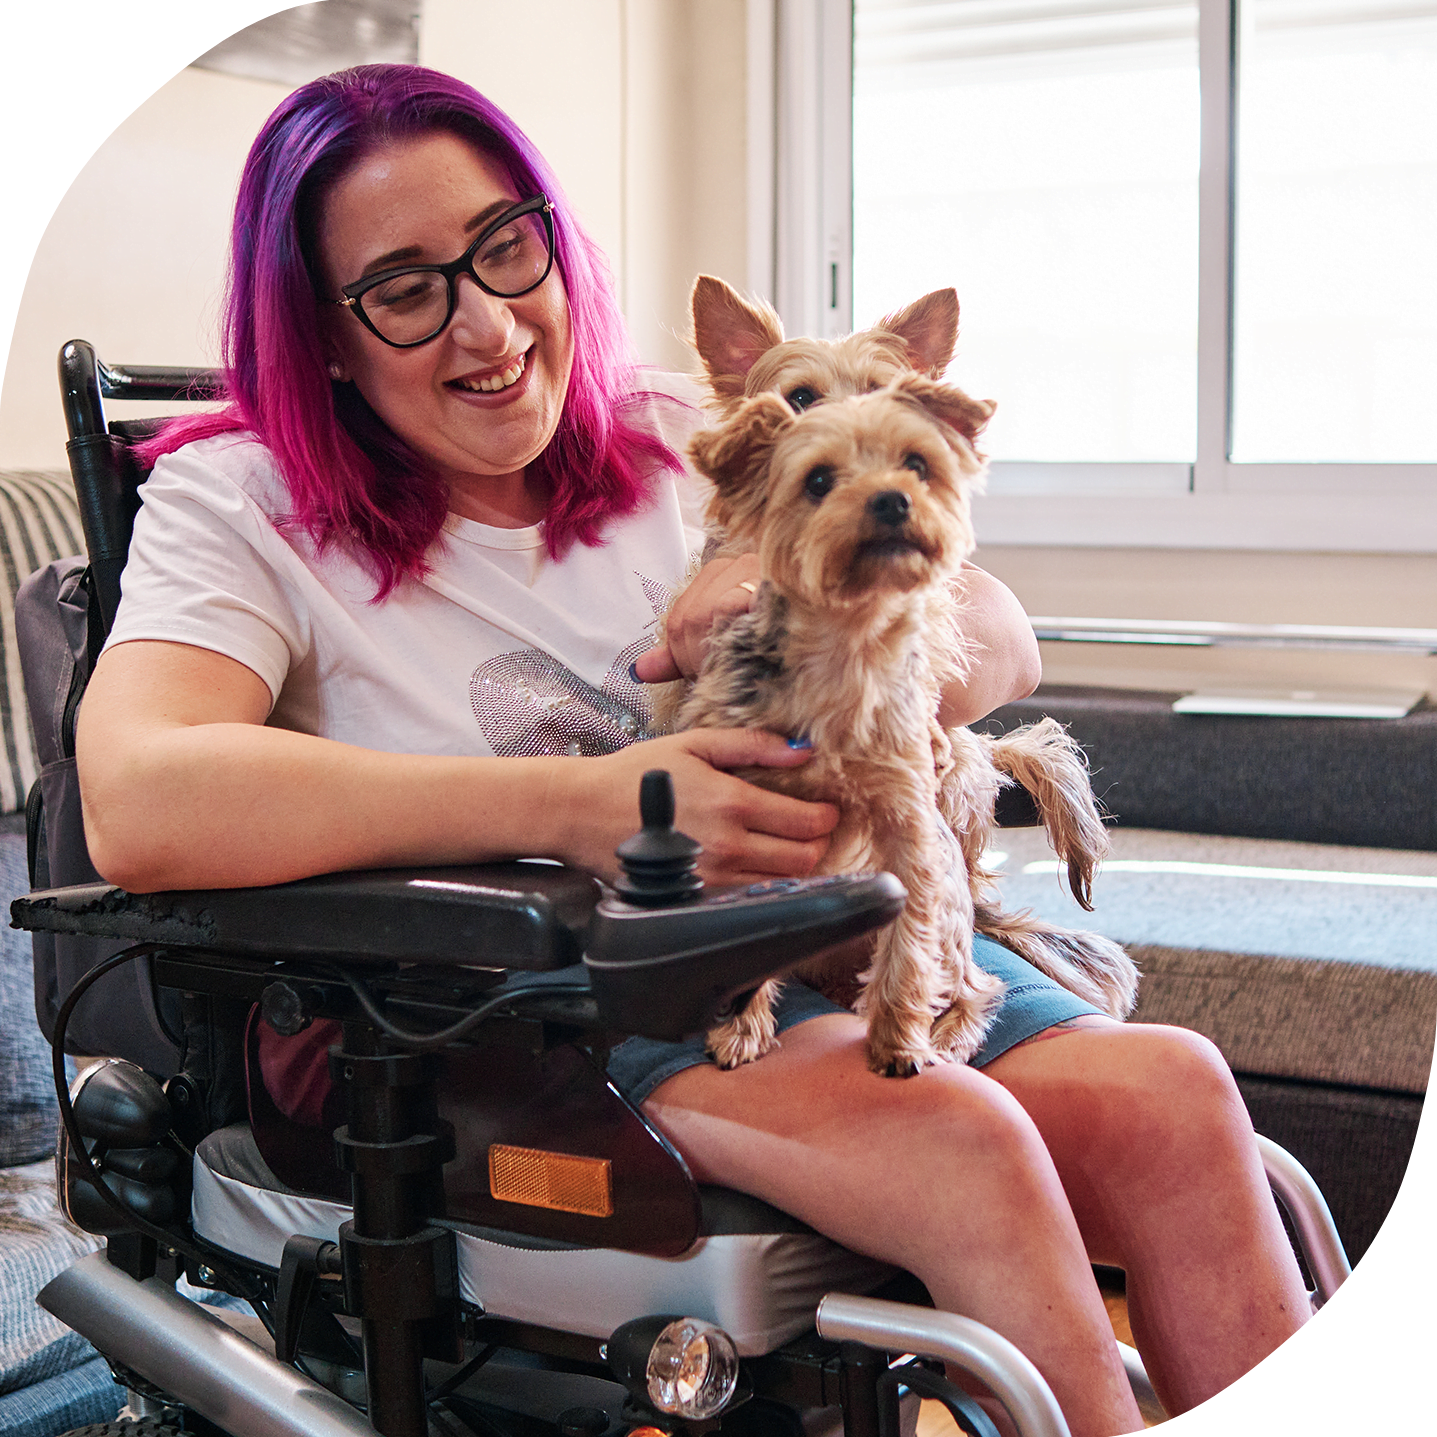 A white woman with pink and purple hair sitting in a motorized wheelchair with two small dogs in her lap